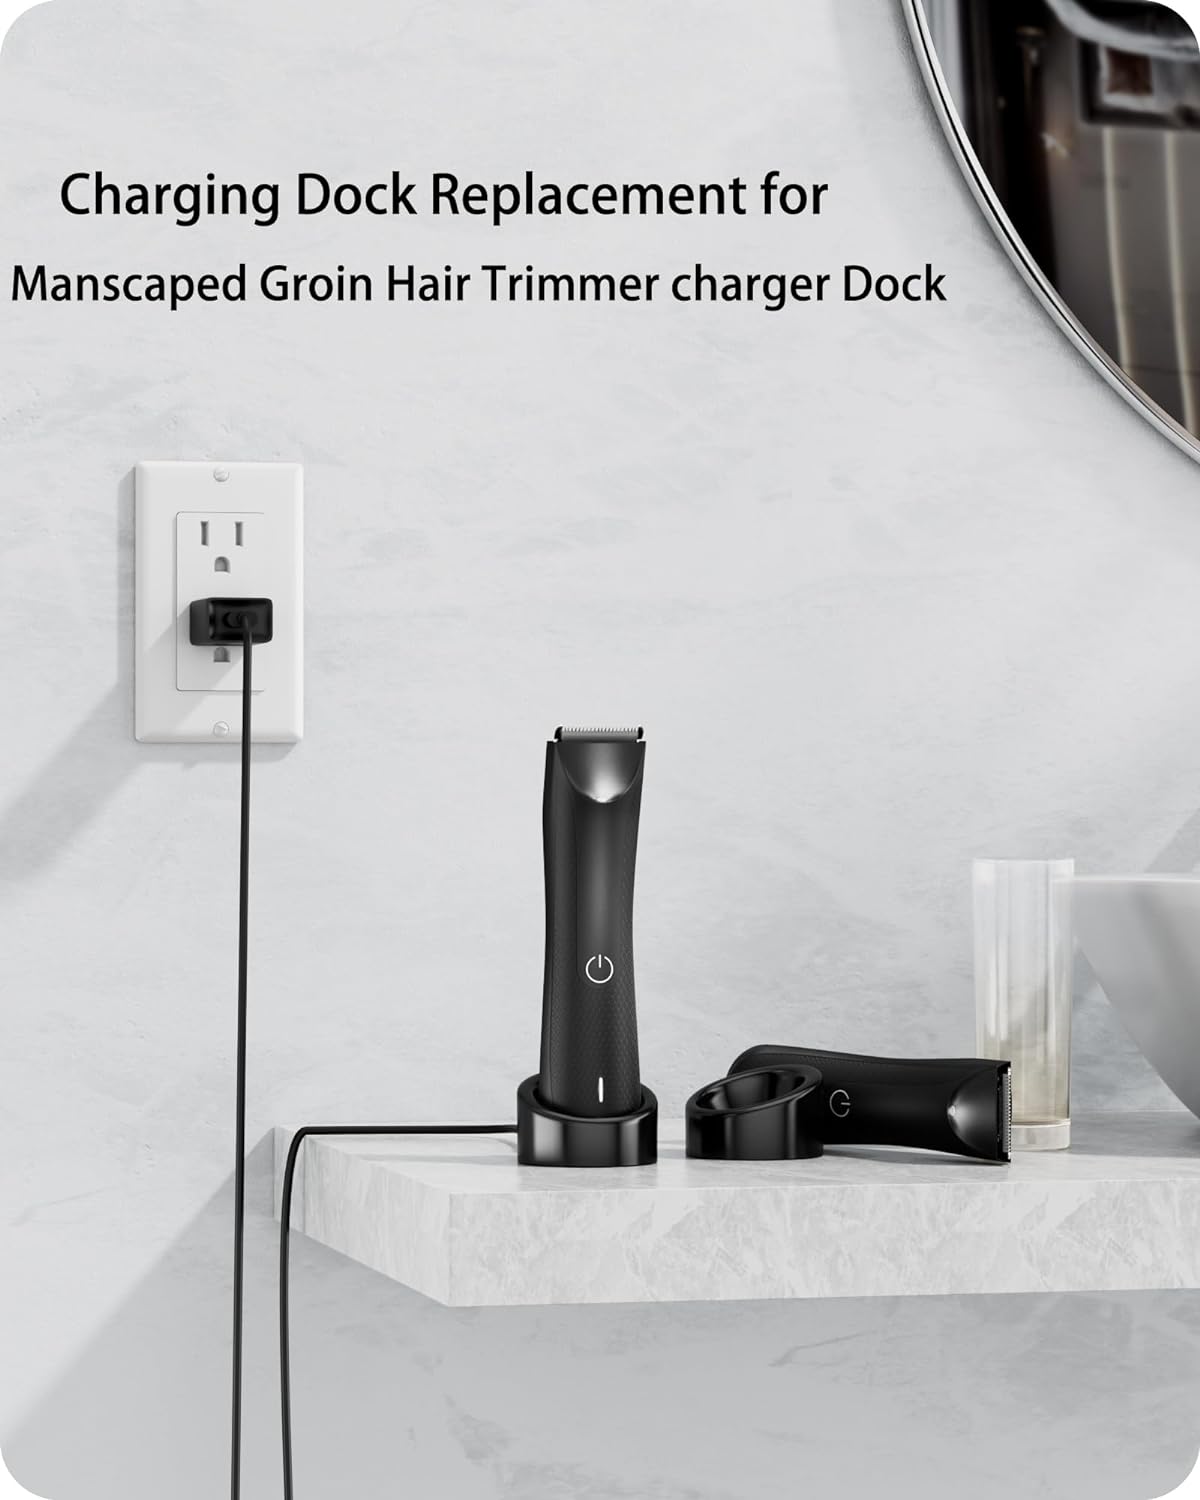 Charging Dock for MANSCAPED Charger Dock Compatible with MANSCAPED Lawn Mower 3.0 & 2.0 Electric Groin Hair Trimmer and